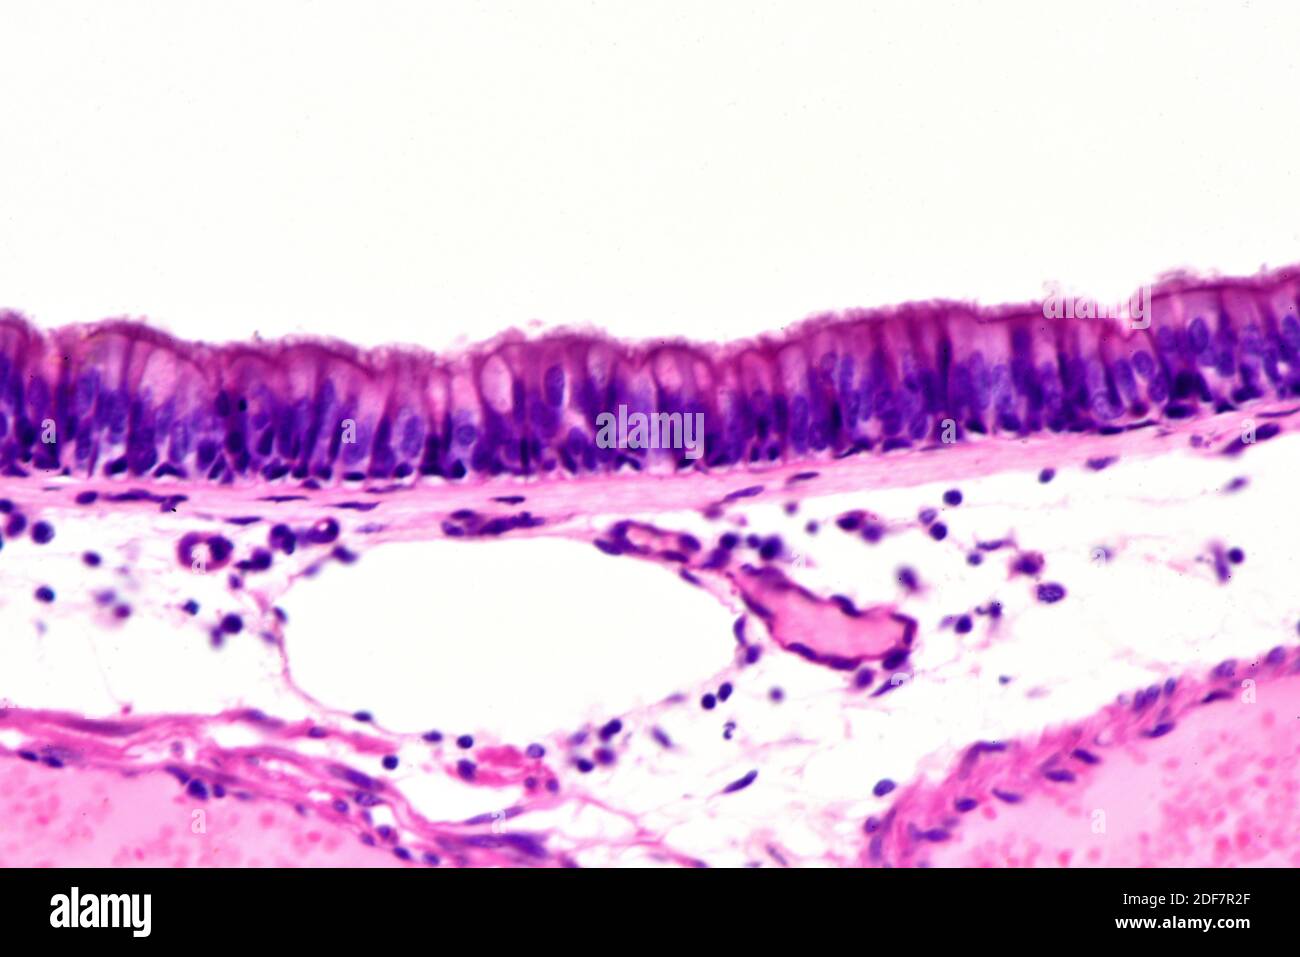 Human ciliated pseudostratified columnar epithelium. X250 at 10 cm wide. Stock Photo